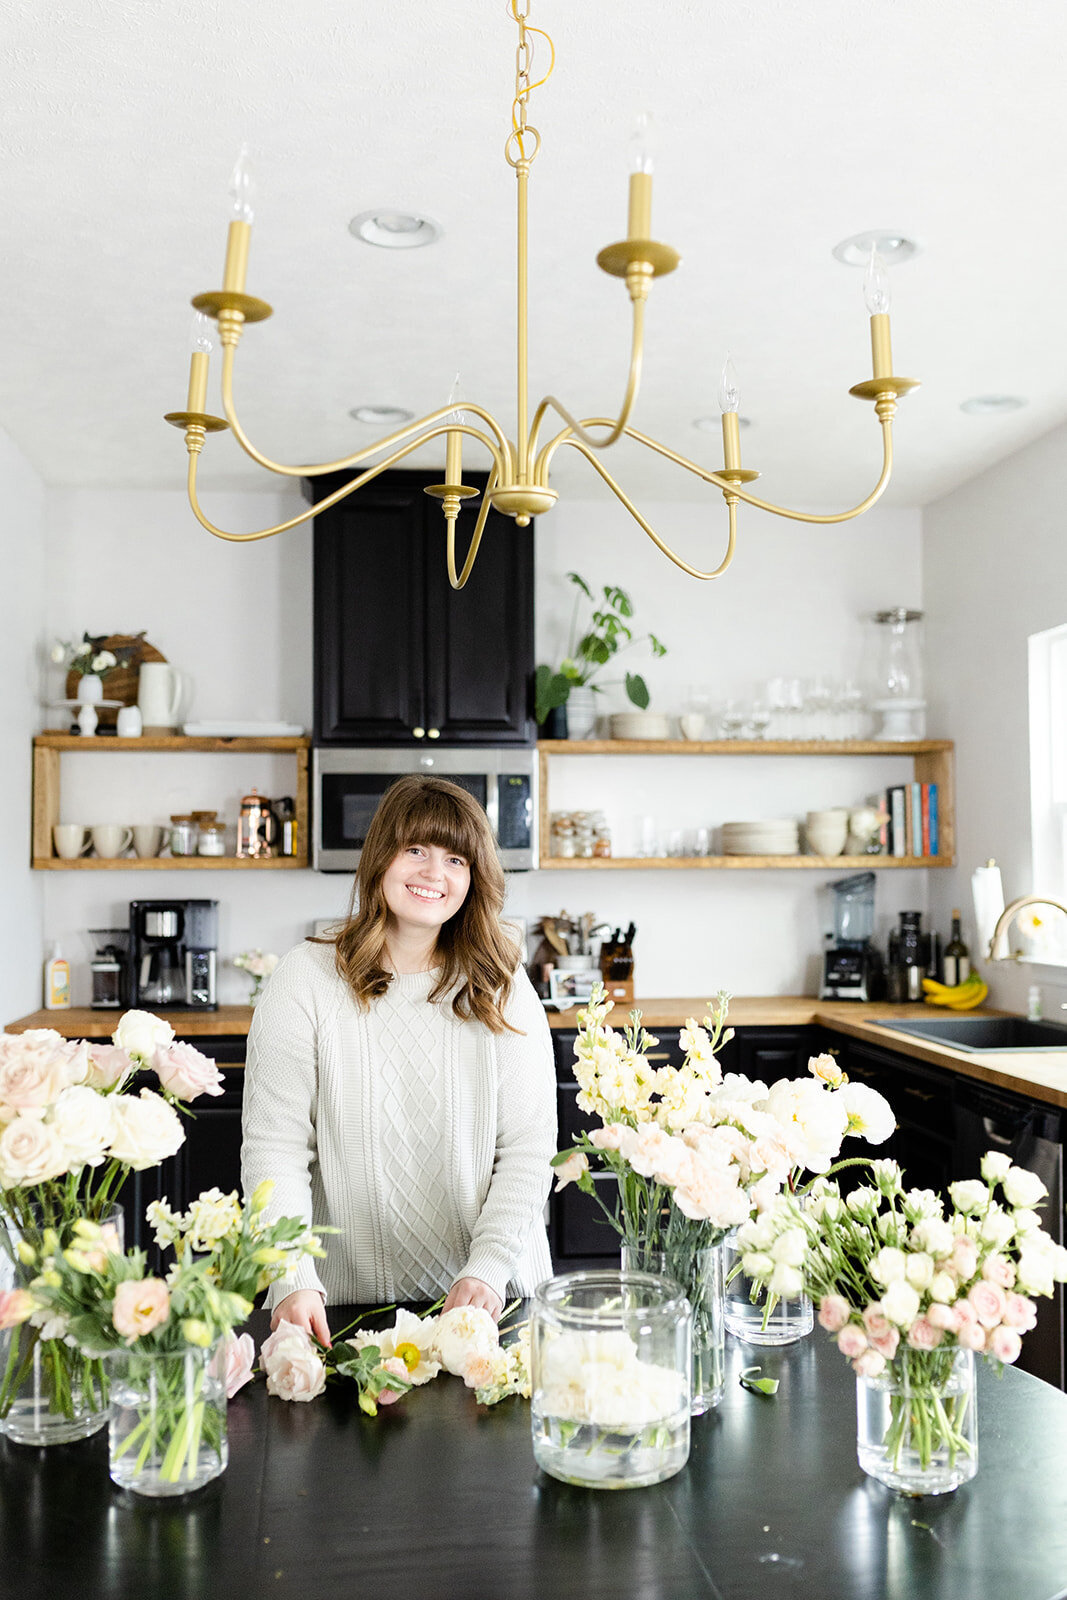 Florist standing with flowers for brand photos